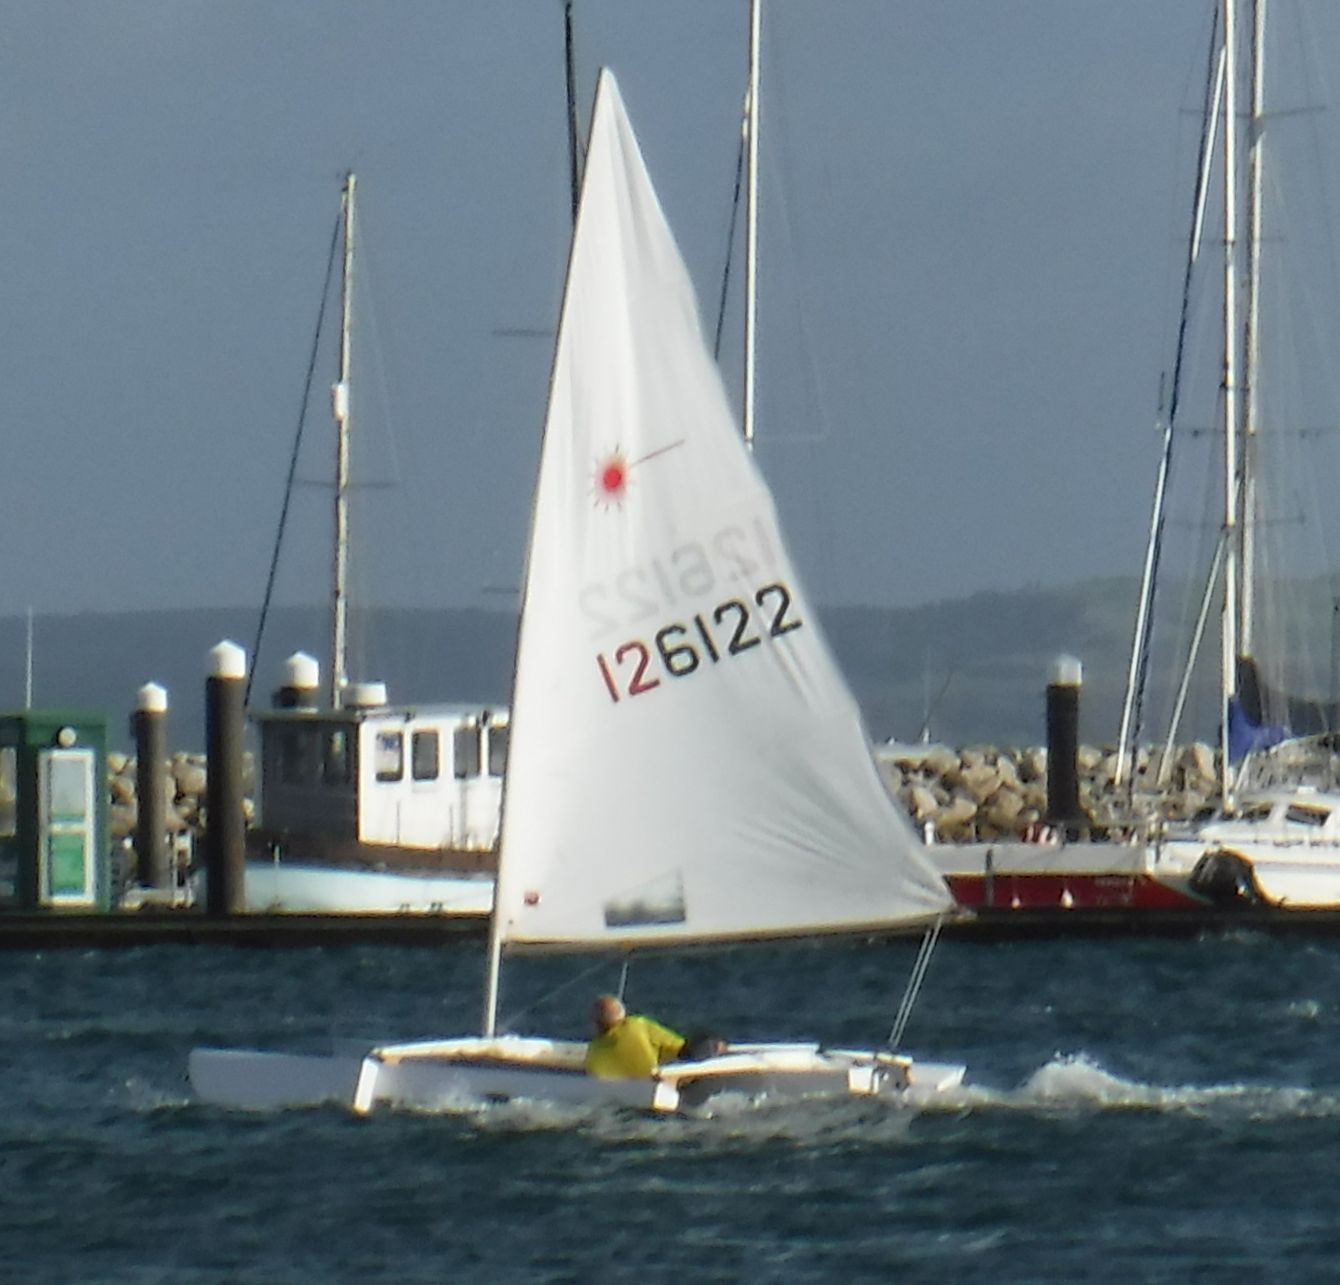 Fred sailing after a tow start